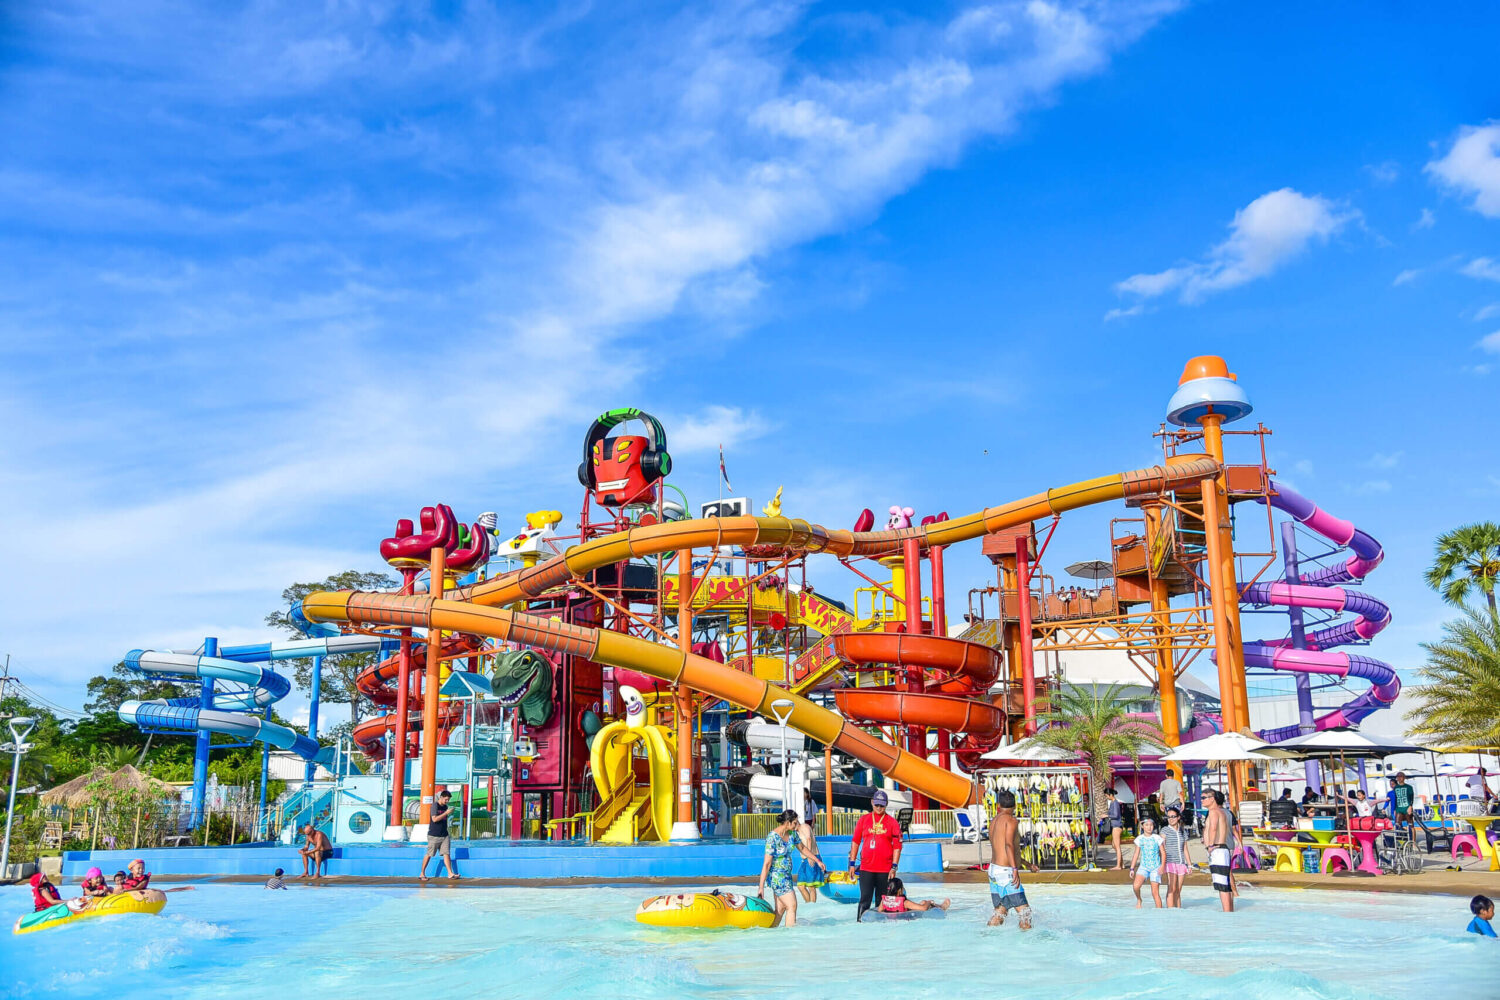 The most equal water parks in Thailand